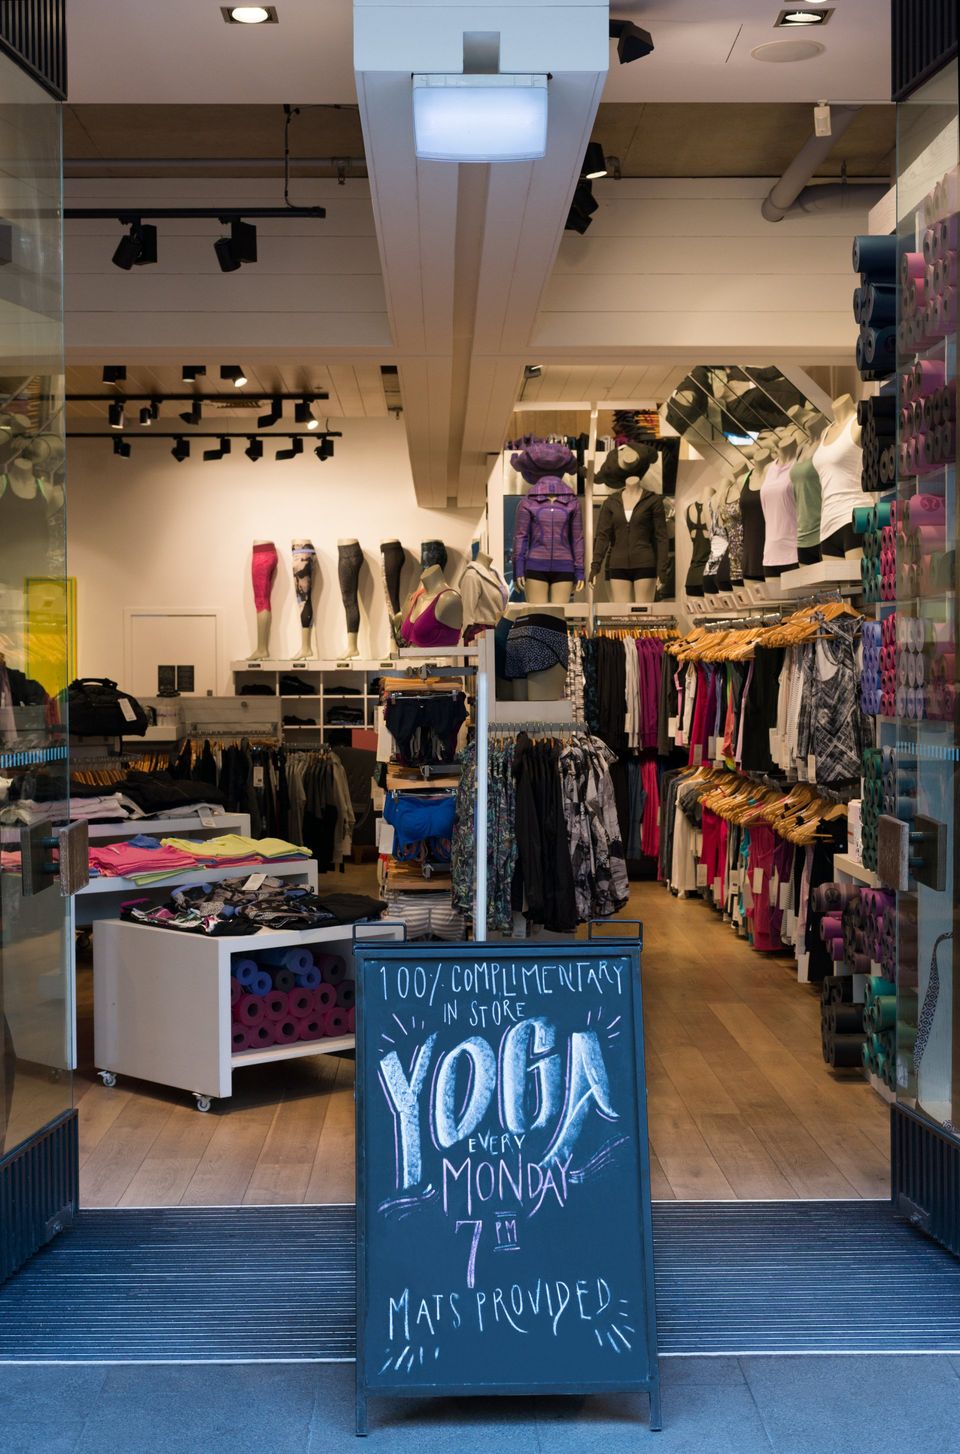 LuluLemon is known for in store community events lead by local fitness coaches aka Ambassadors